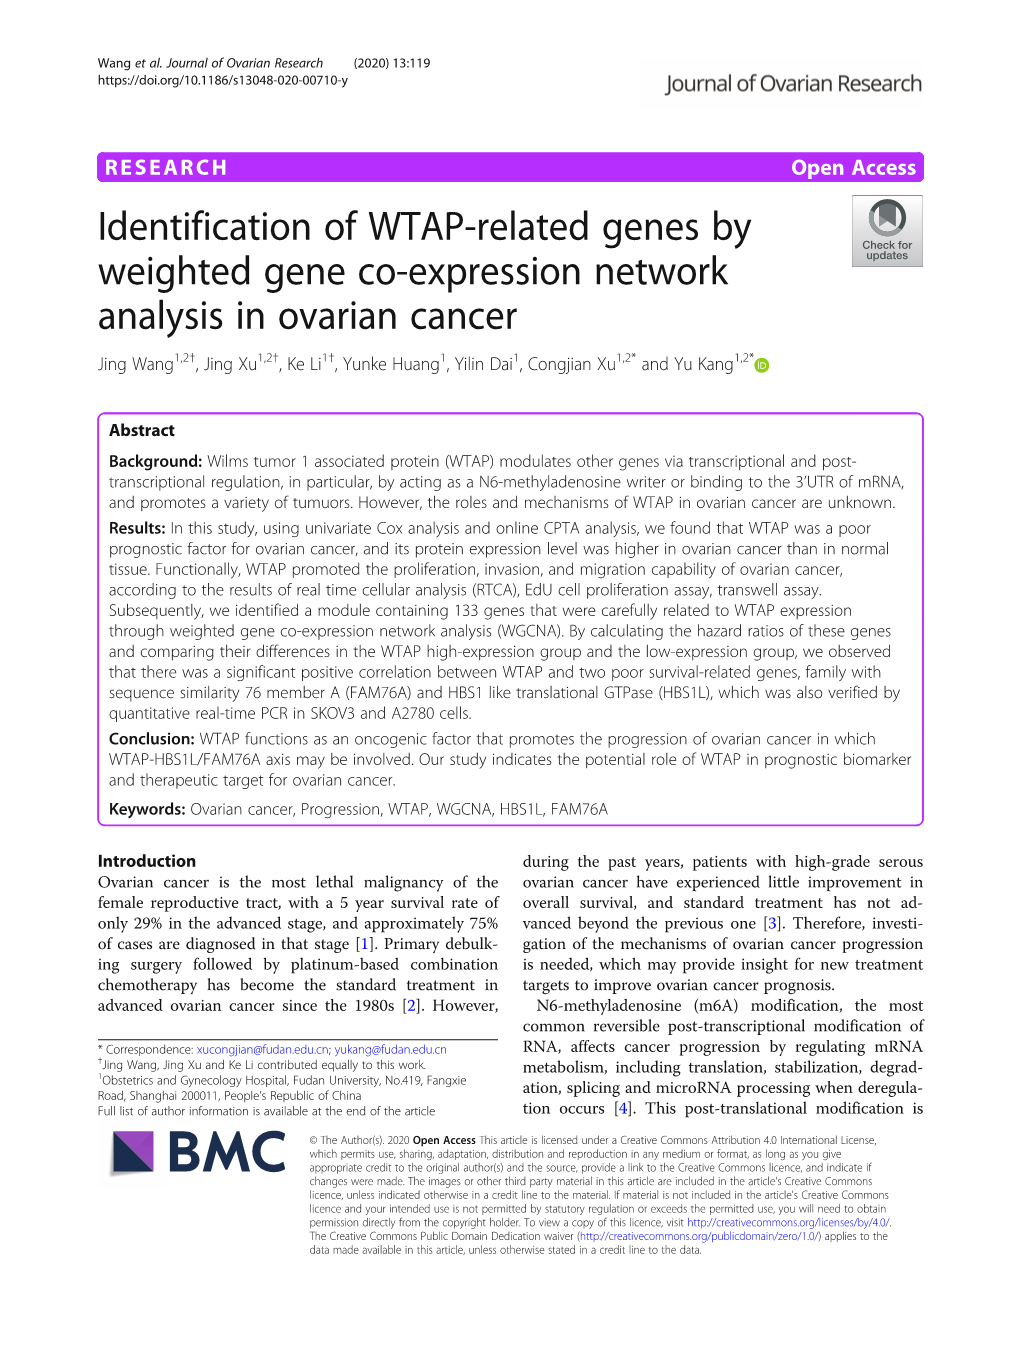 Identification of WTAP-Related Genes By